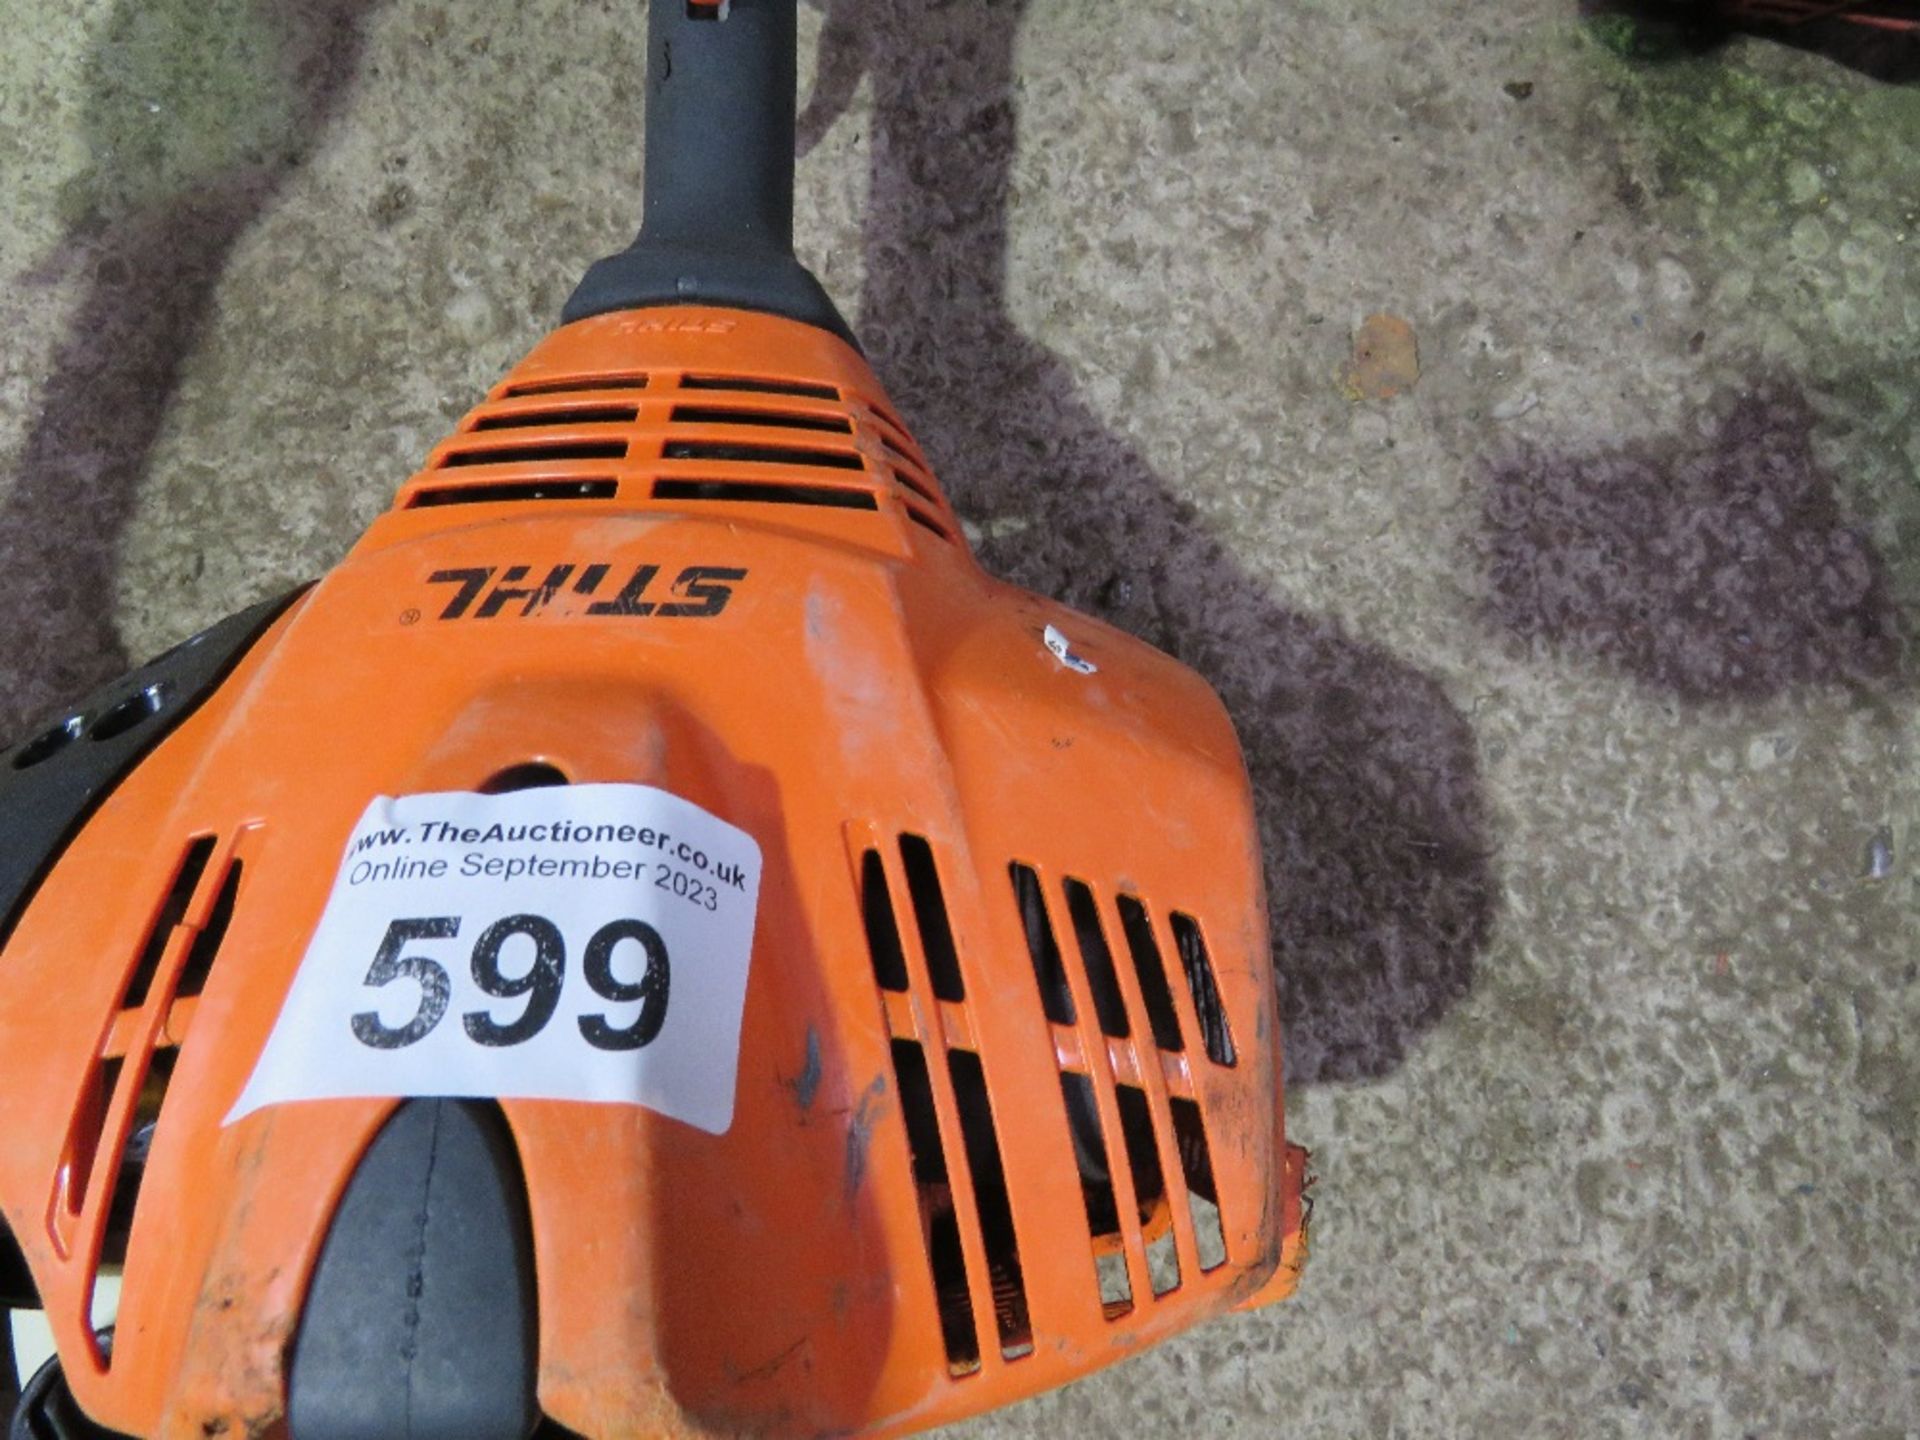 STIHL FS56RC PETROL STRIMMER. THIS LOT IS SOLD UNDER THE AUCTIONEERS MARGIN SCHEME, THEREFORE NO - Image 2 of 4